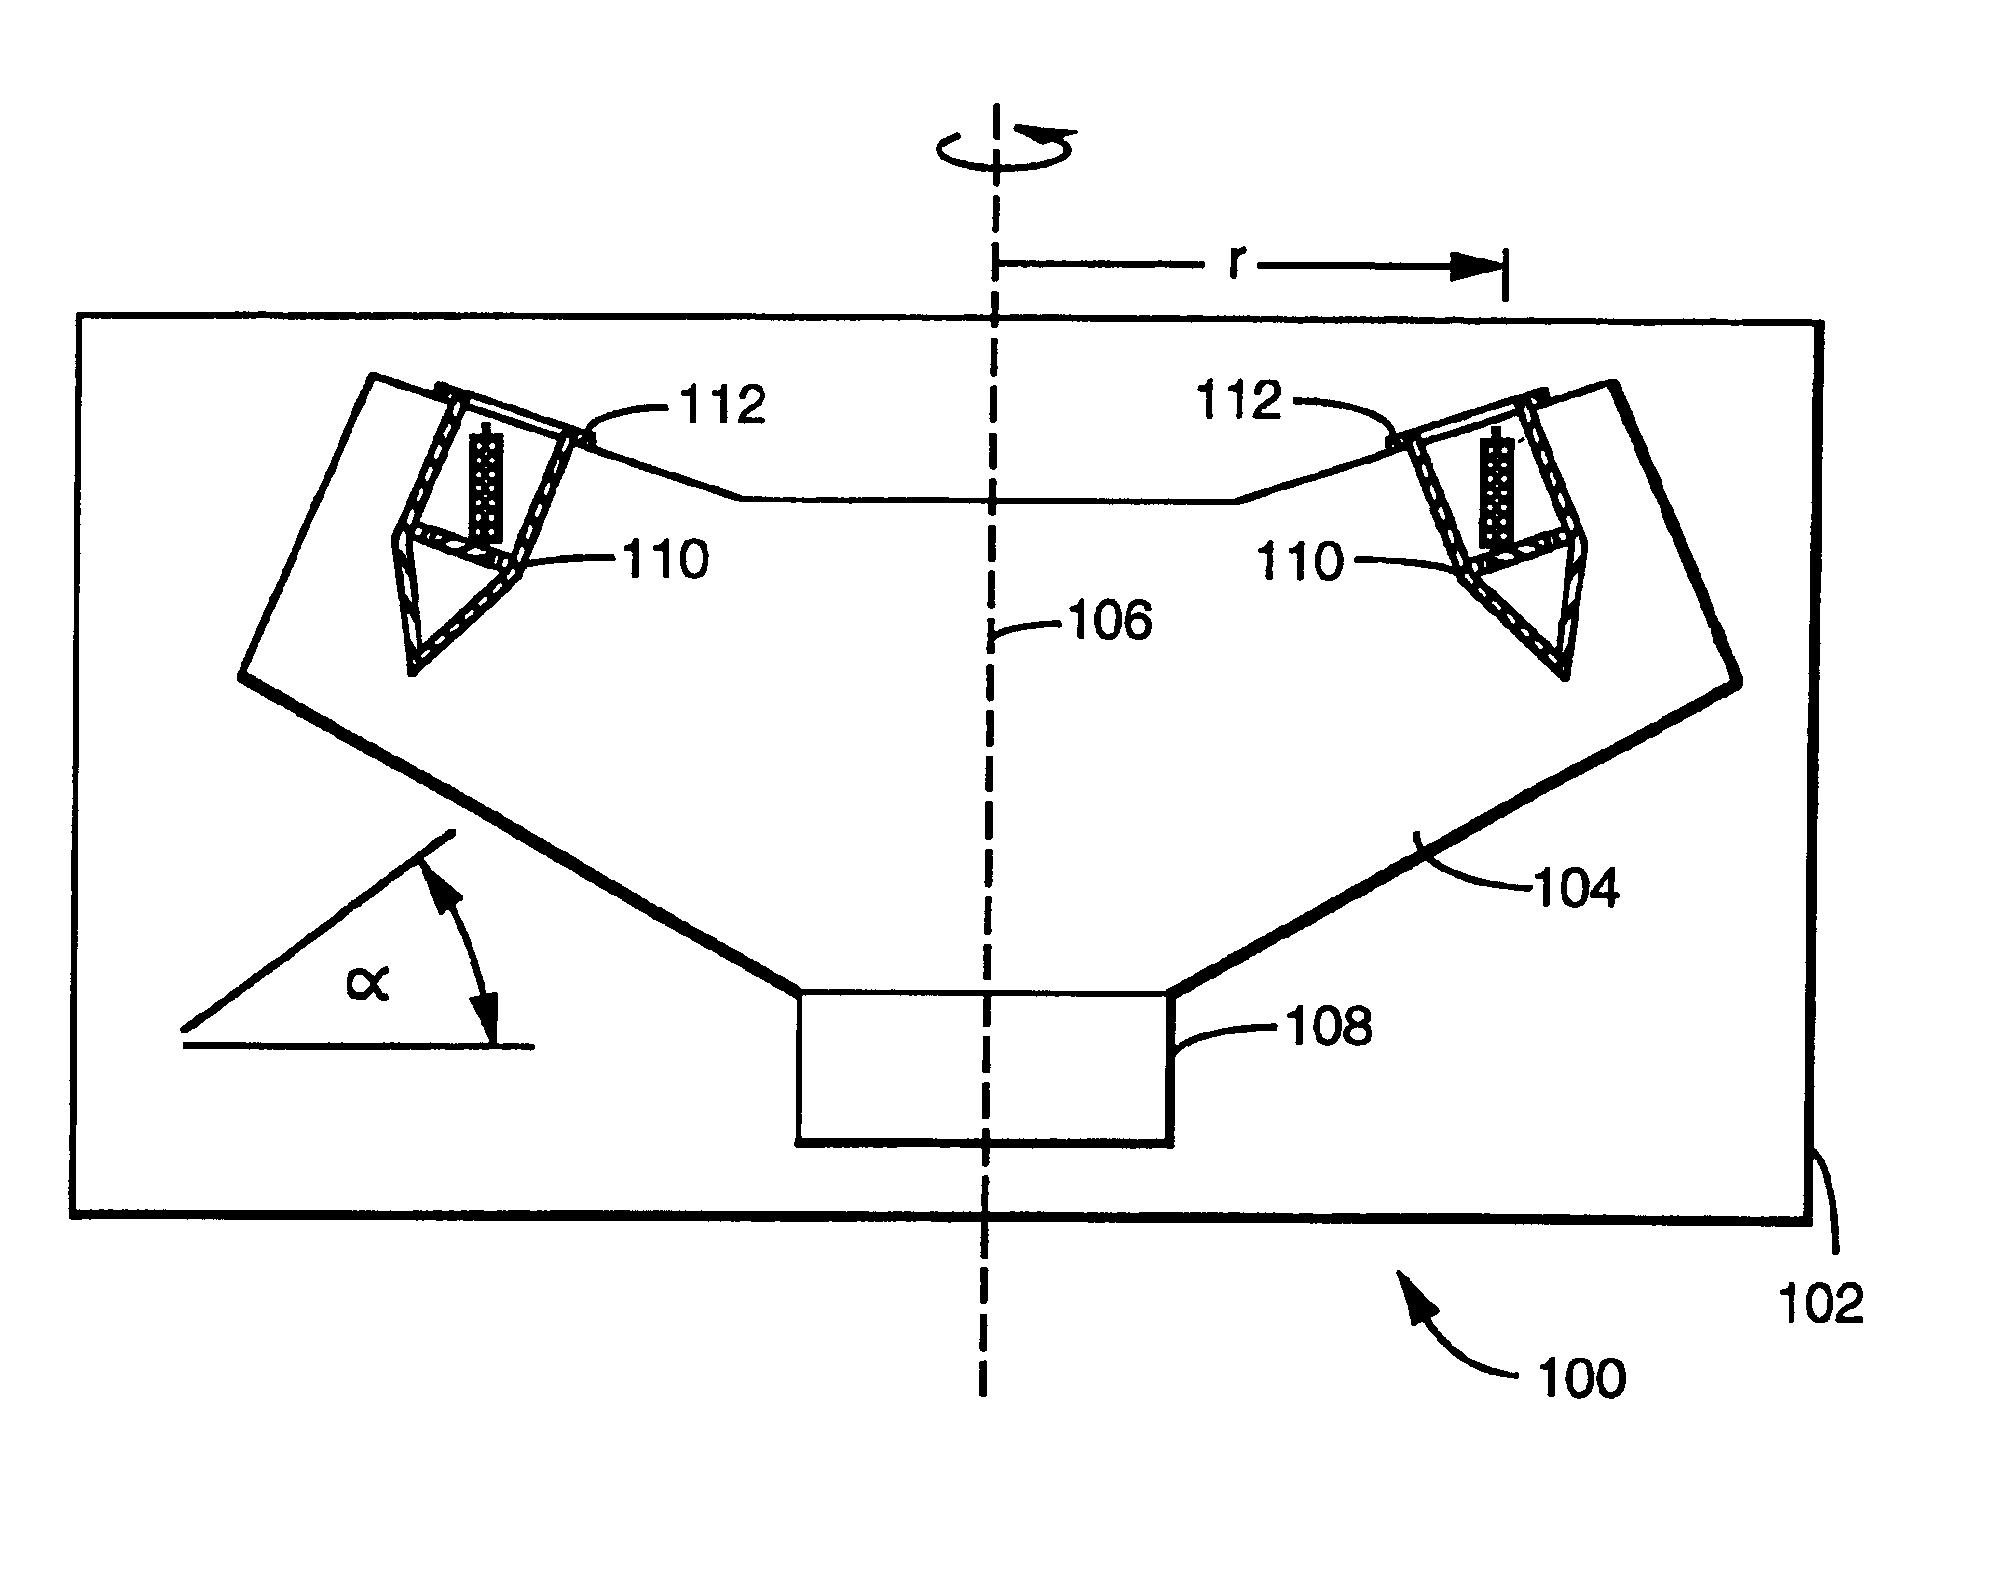 System for the process of coating implantable medical devices